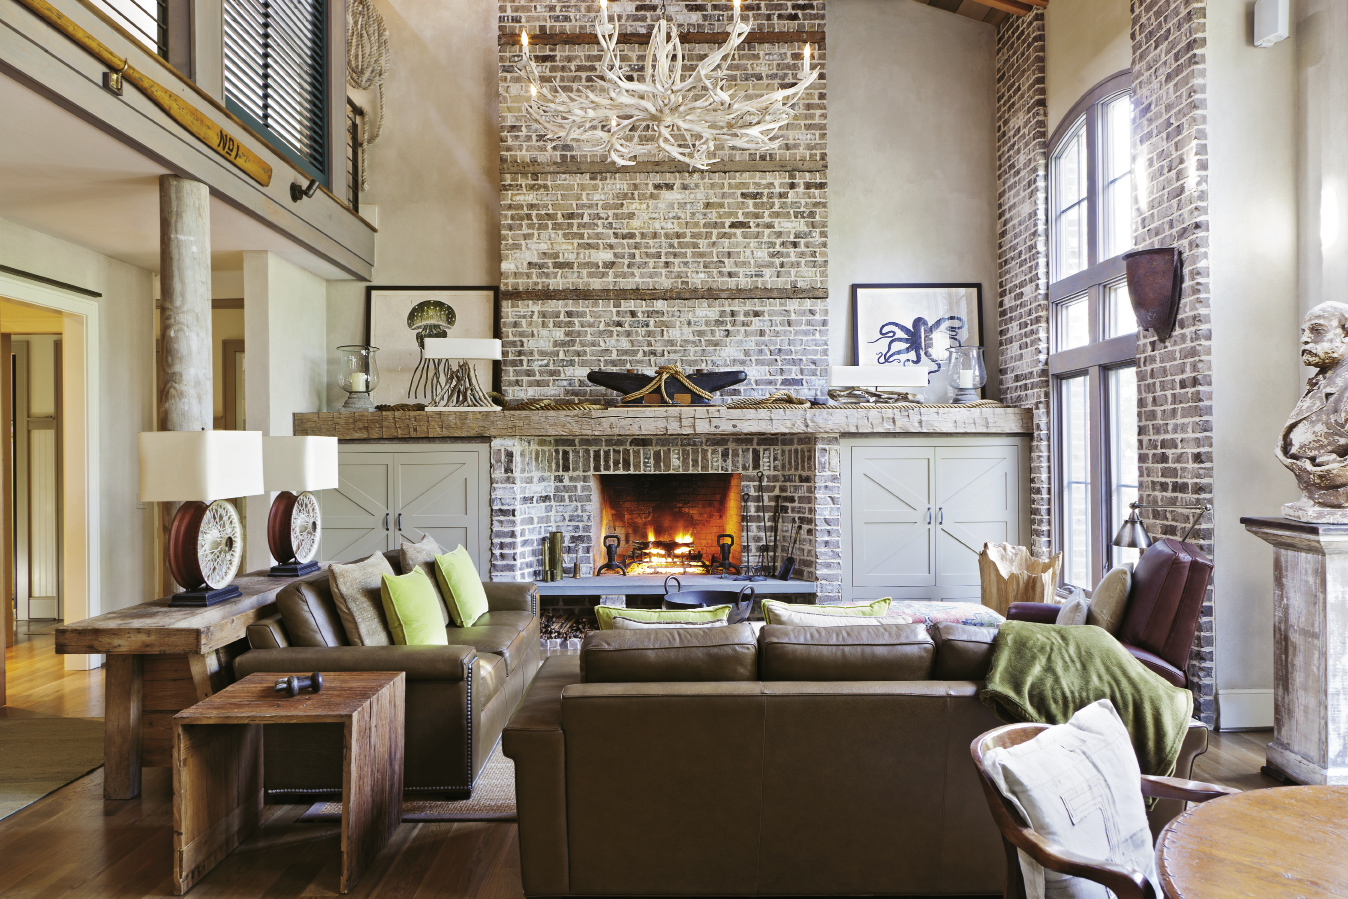 High ceilings and exposed brick recall downtown’s historical cotton warehouses. Industrial details, such as iron railings, and nautical touches, such as the anchor and ropes displayed on the mantel, are touchstones of the owners’ personal style.